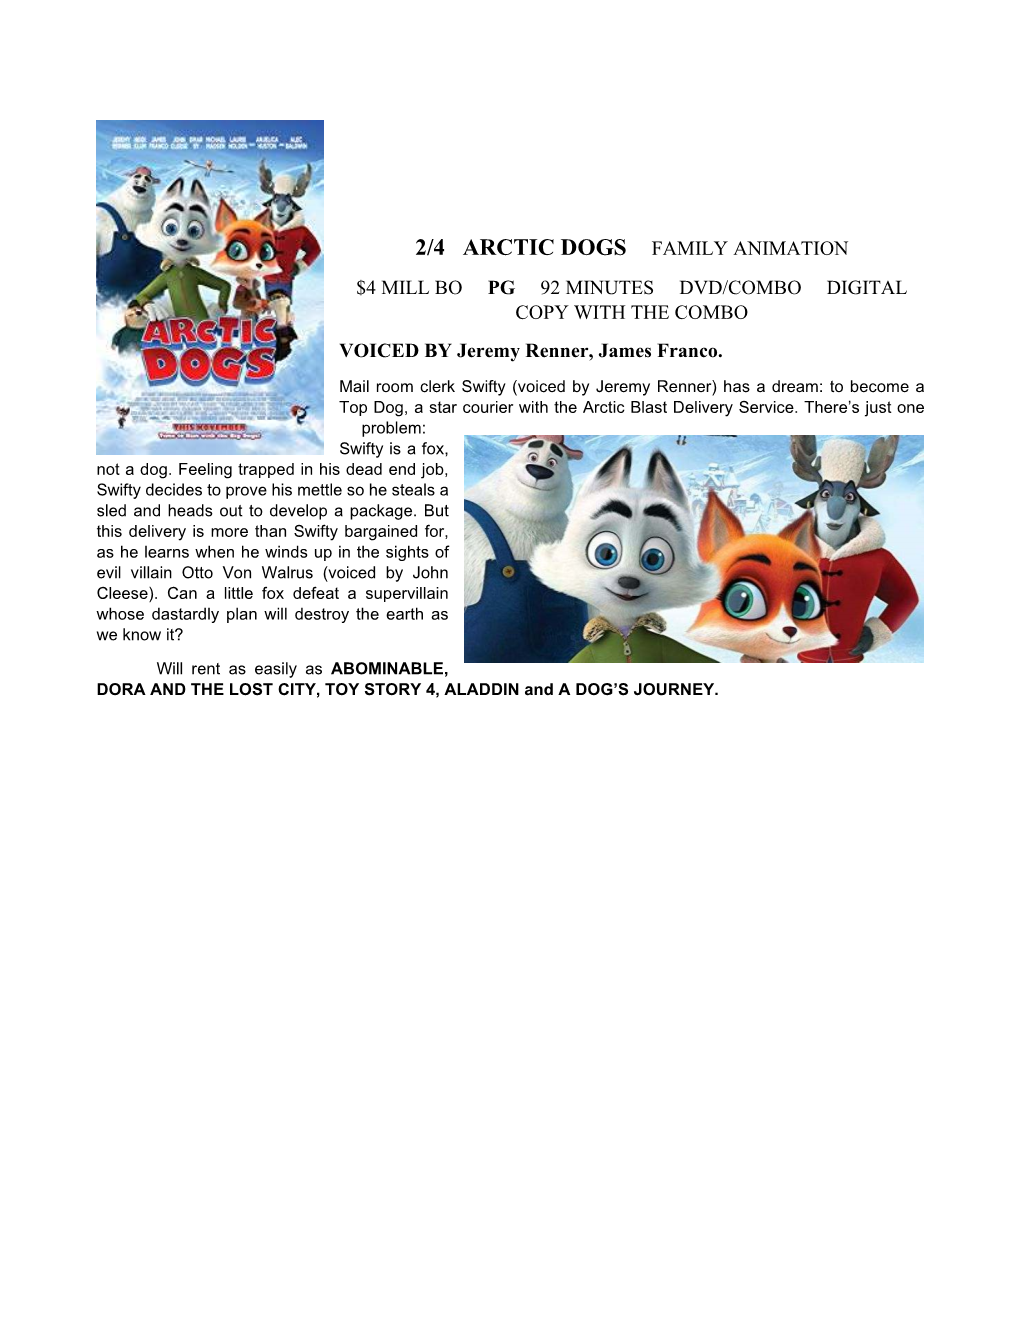 2/4 Arctic Dogs Family Animation $4 Mill Bo Pg 92 Minutes Dvd/Combo Digital Copy with the Combo